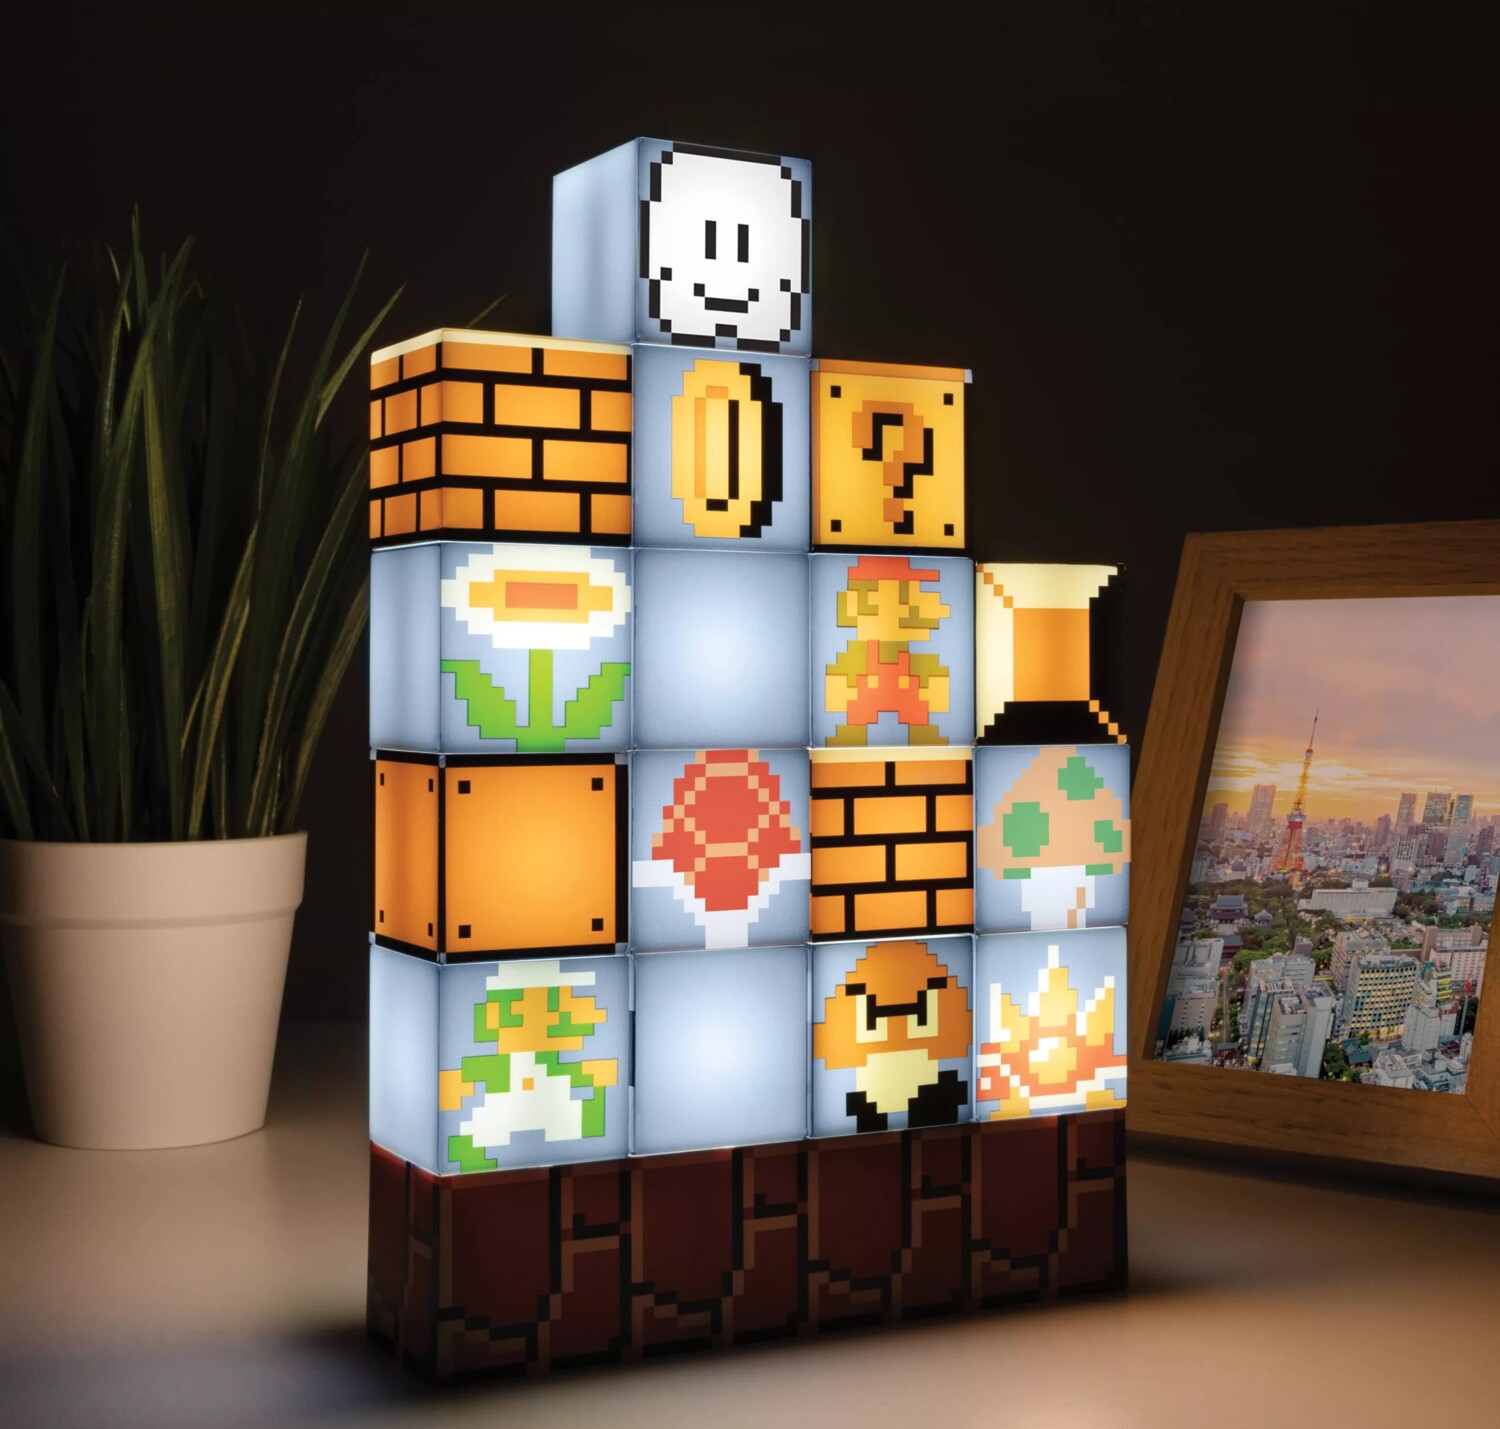 Lampe Super Mario Bros Build a Level, Lampes d'ambiance